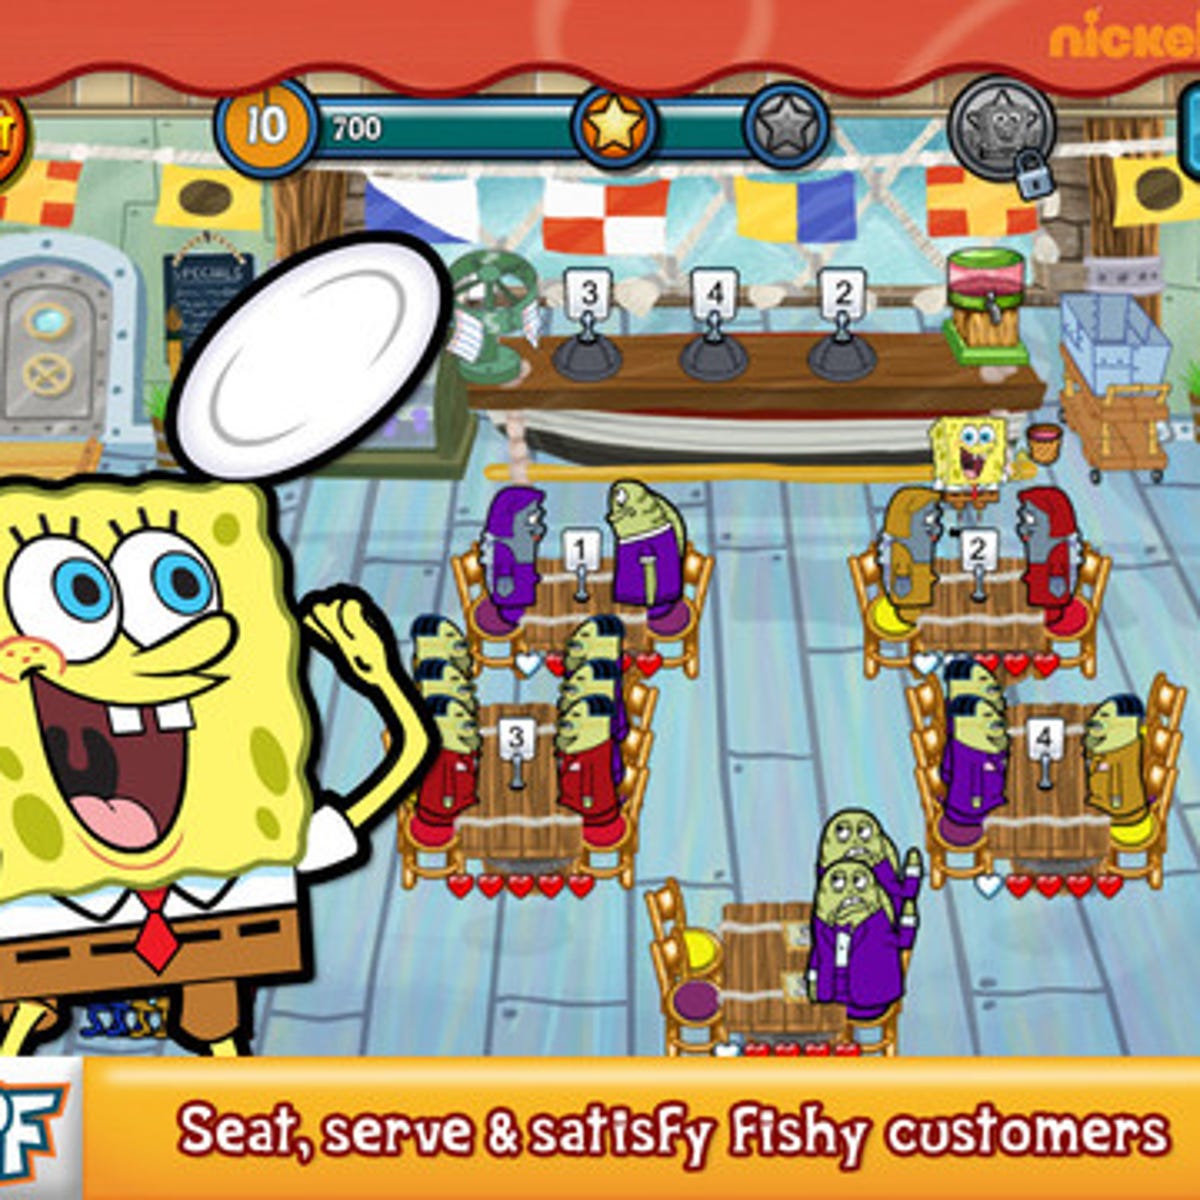 SpongeBob disappears from app store after privacy criticism - CNET